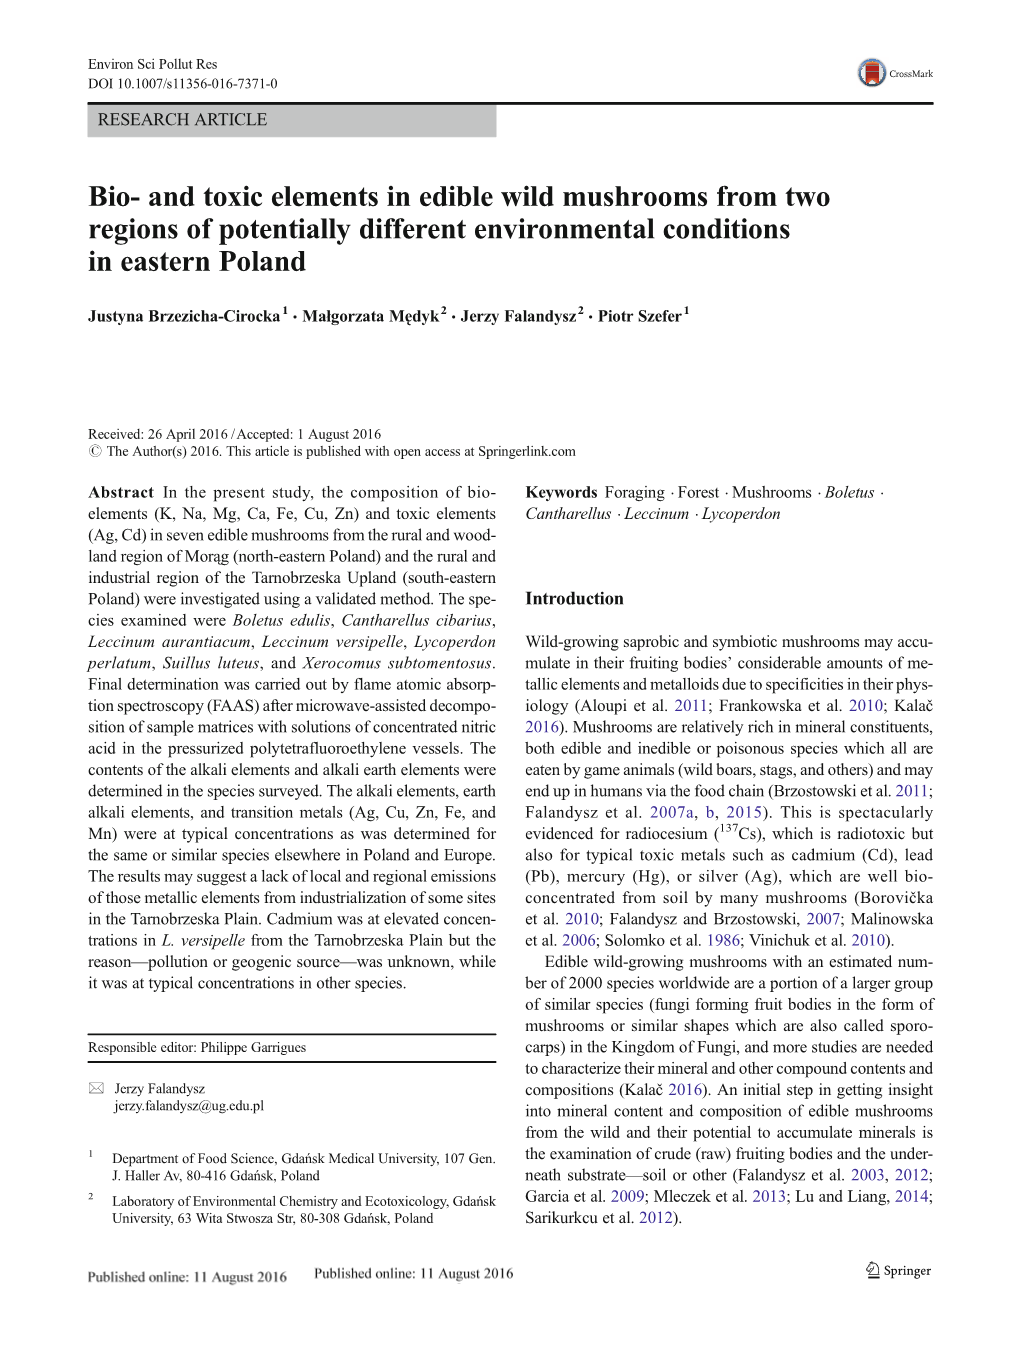 Bio- and Toxic Elements in Edible Wild Mushrooms from Two Regions of Potentially Different Environmental Conditions in Eastern Poland